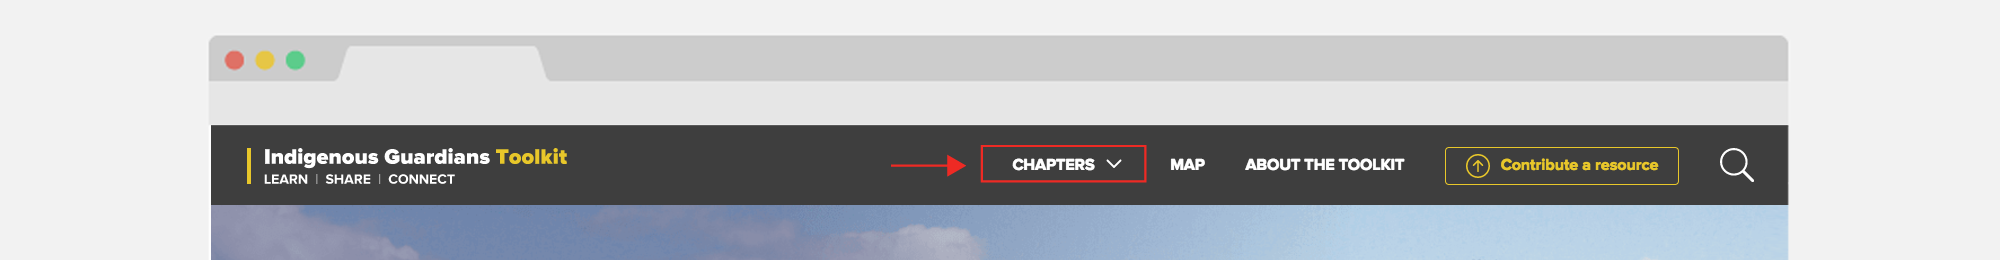 Chapter icon in top nav